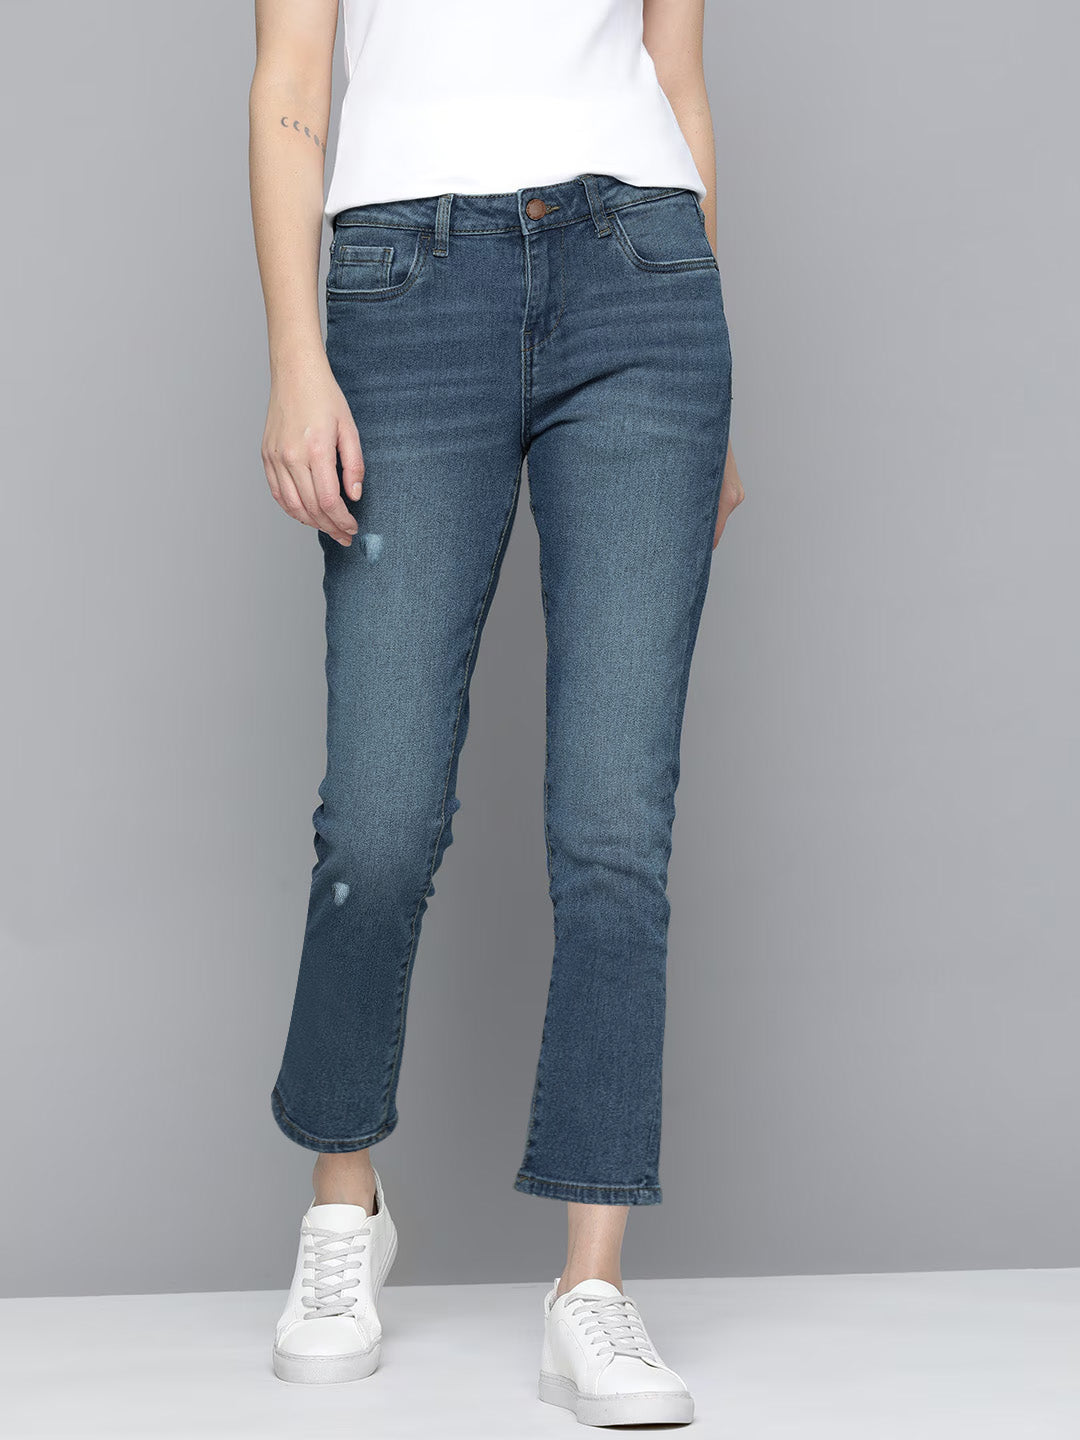 F&F Bell Botton Stretch Denim For Women-Blue Faded With Grinded Style-BE1305